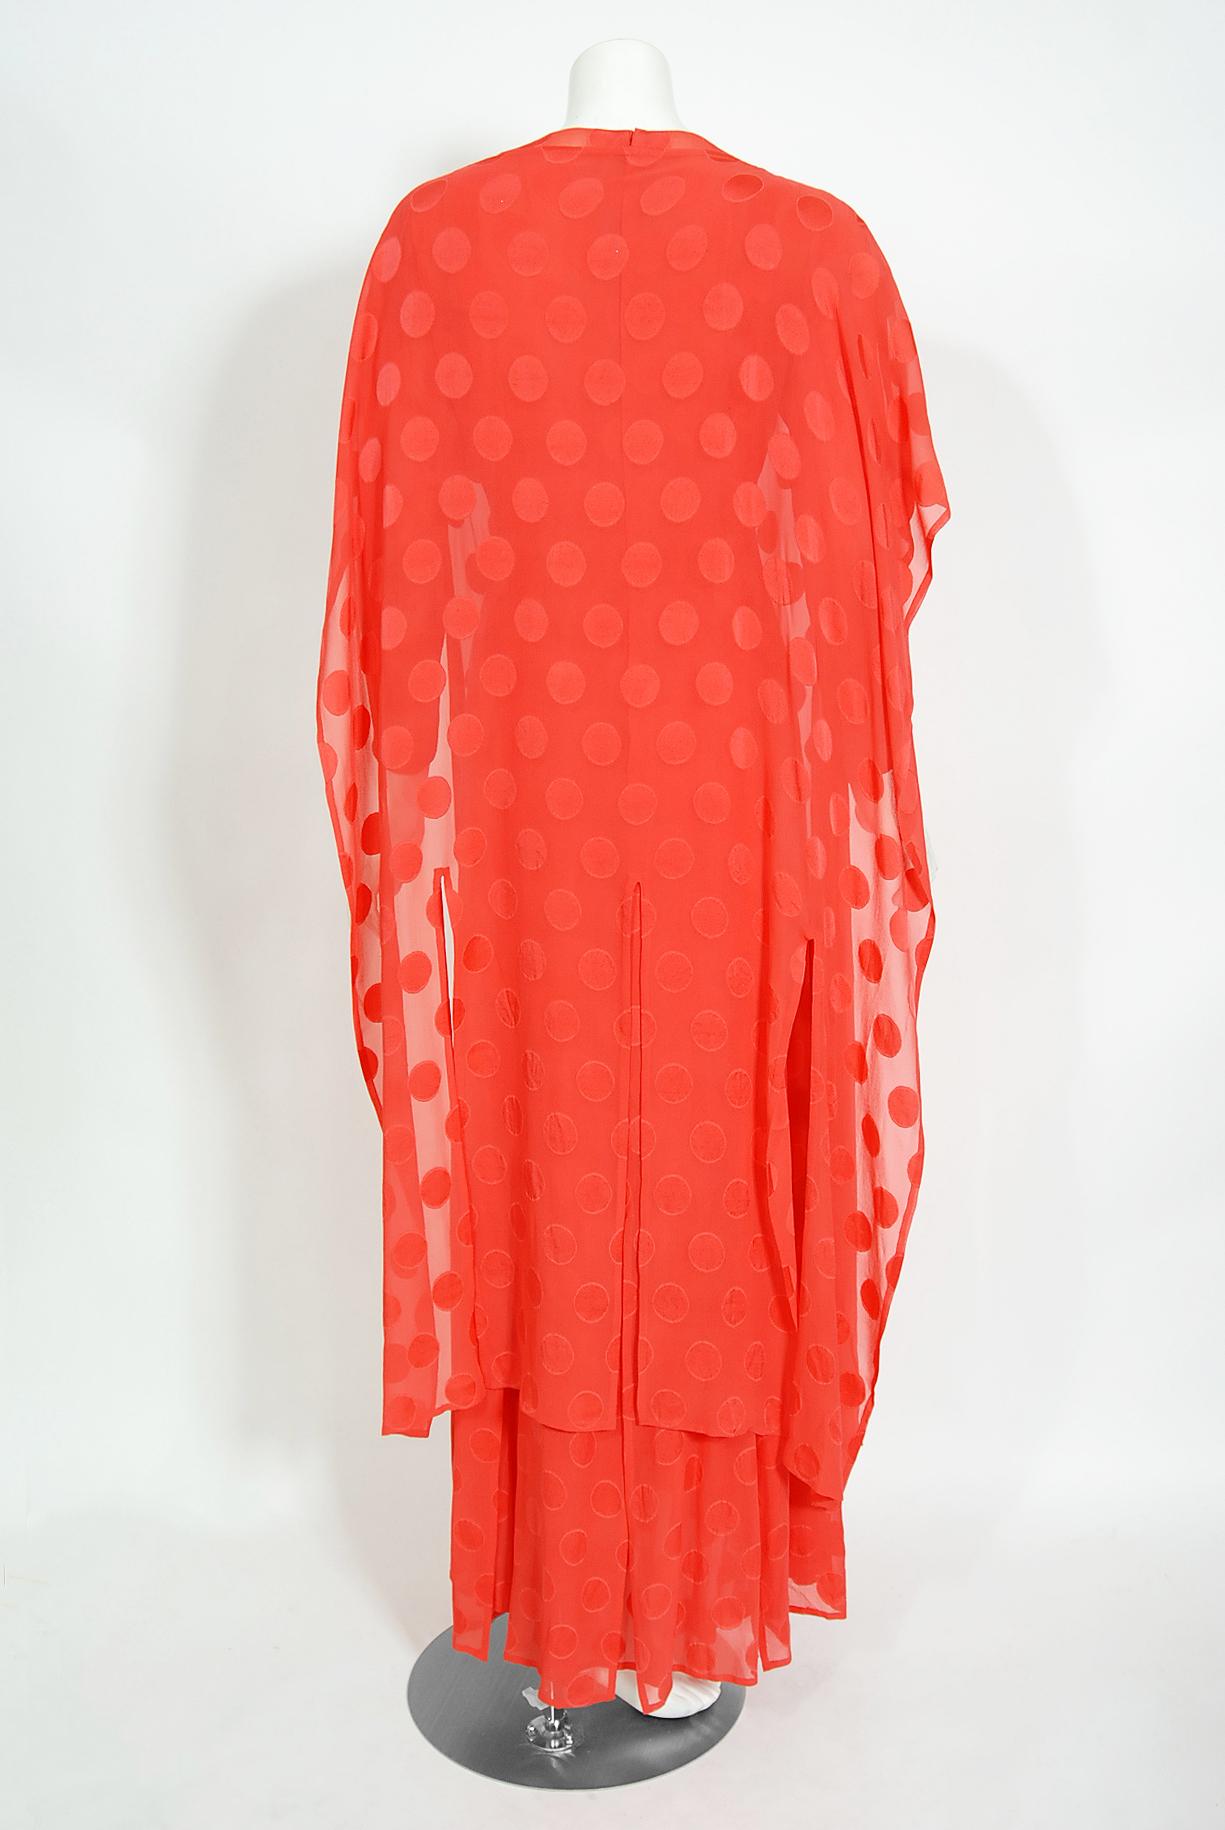 Vintage 1973 Givenchy Haute Couture Orange Dotted Silk Carwash-Hem Caftan Gown For Sale 8